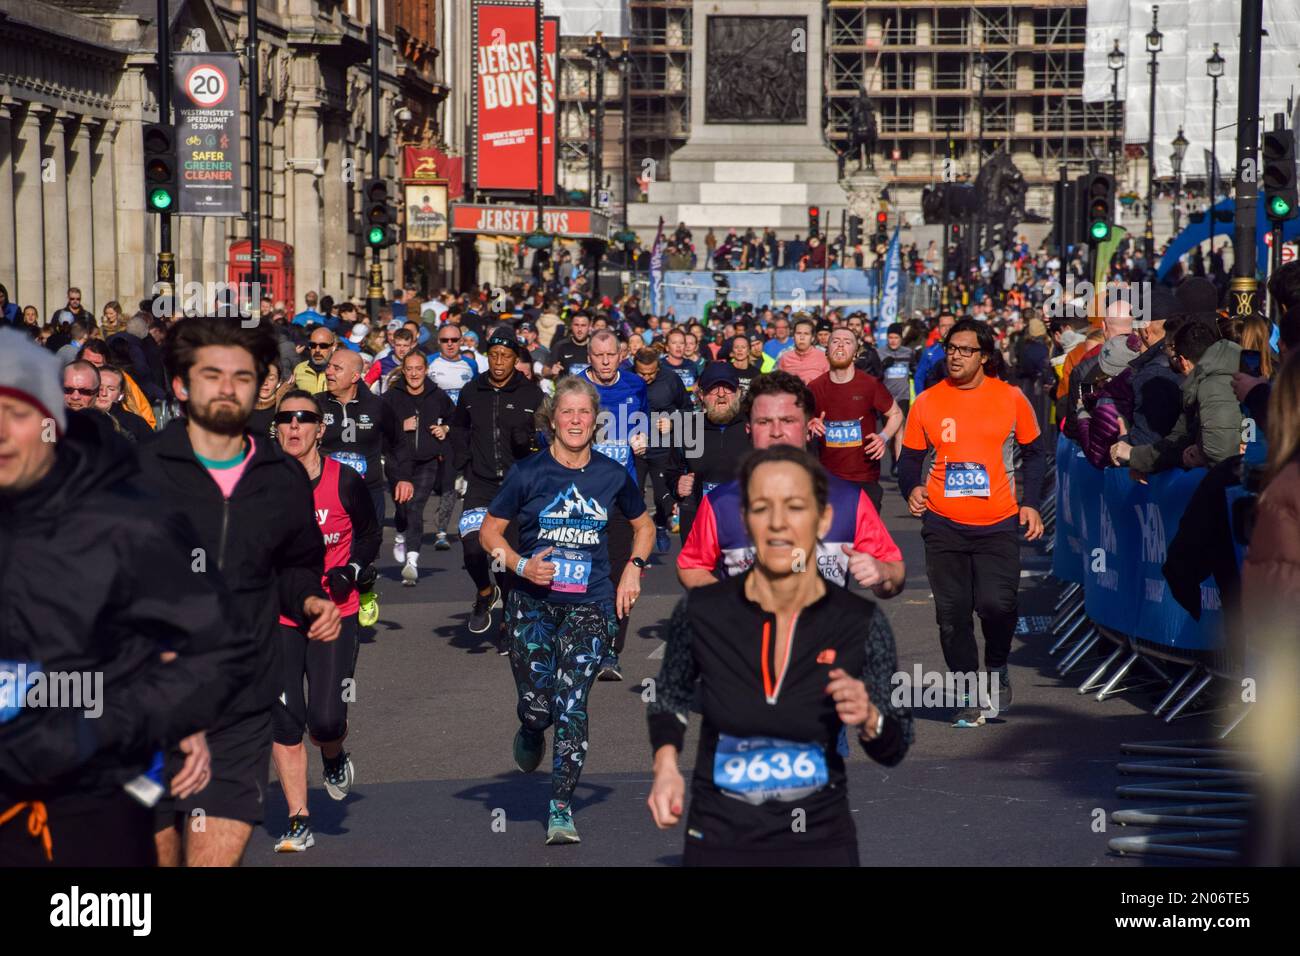 London, UK. 5th February 2023. Participants pass through Whitehall during this year's Cancer Research UK Winter Run in central London. Thousands of runners take part in the annual event raising funds for cancer research. Credit: Vuk Valcic/Alamy Live News Stock Photo